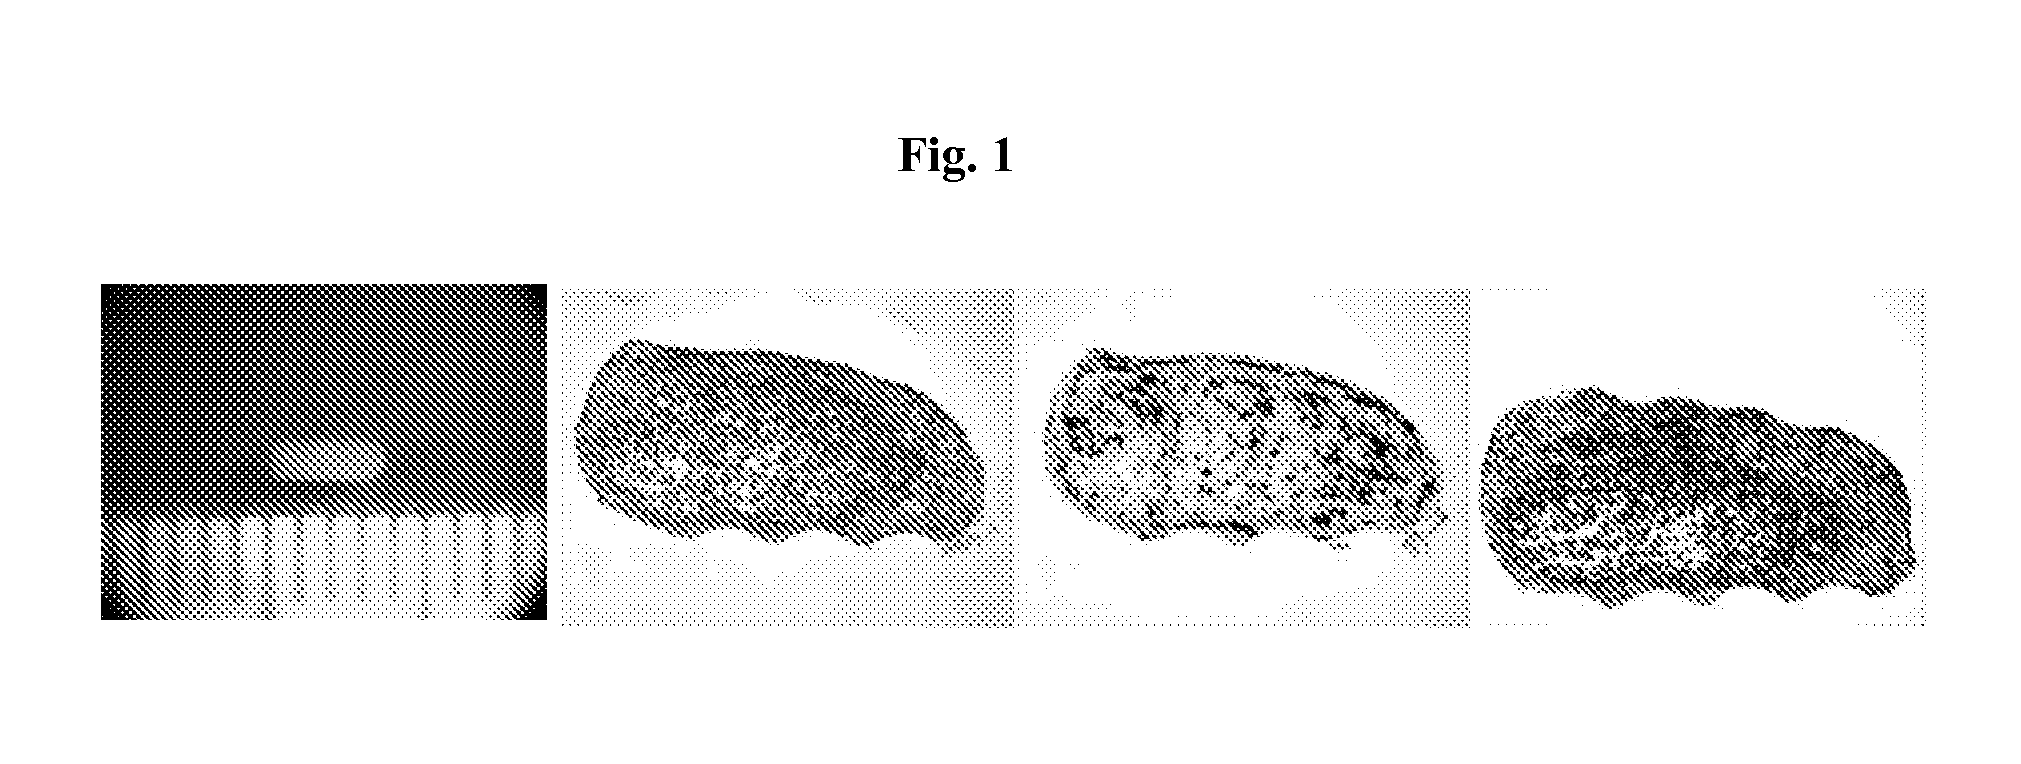 Platform for engineered implantable tissues and organs and methods of making the same